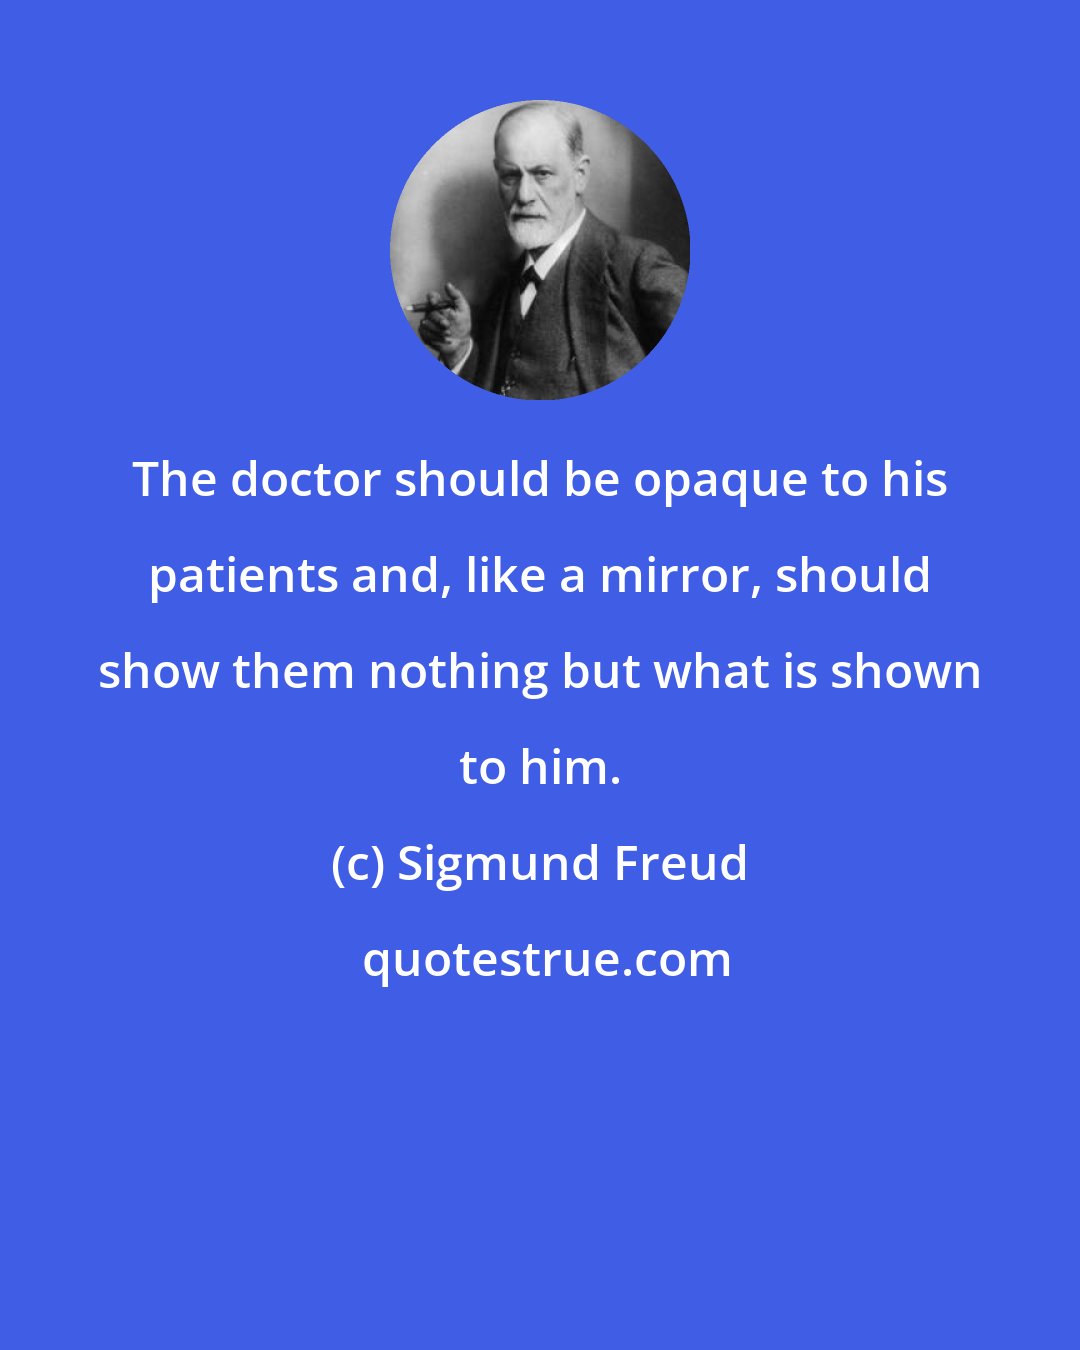 Sigmund Freud: The doctor should be opaque to his patients and, like a mirror, should show them nothing but what is shown to him.